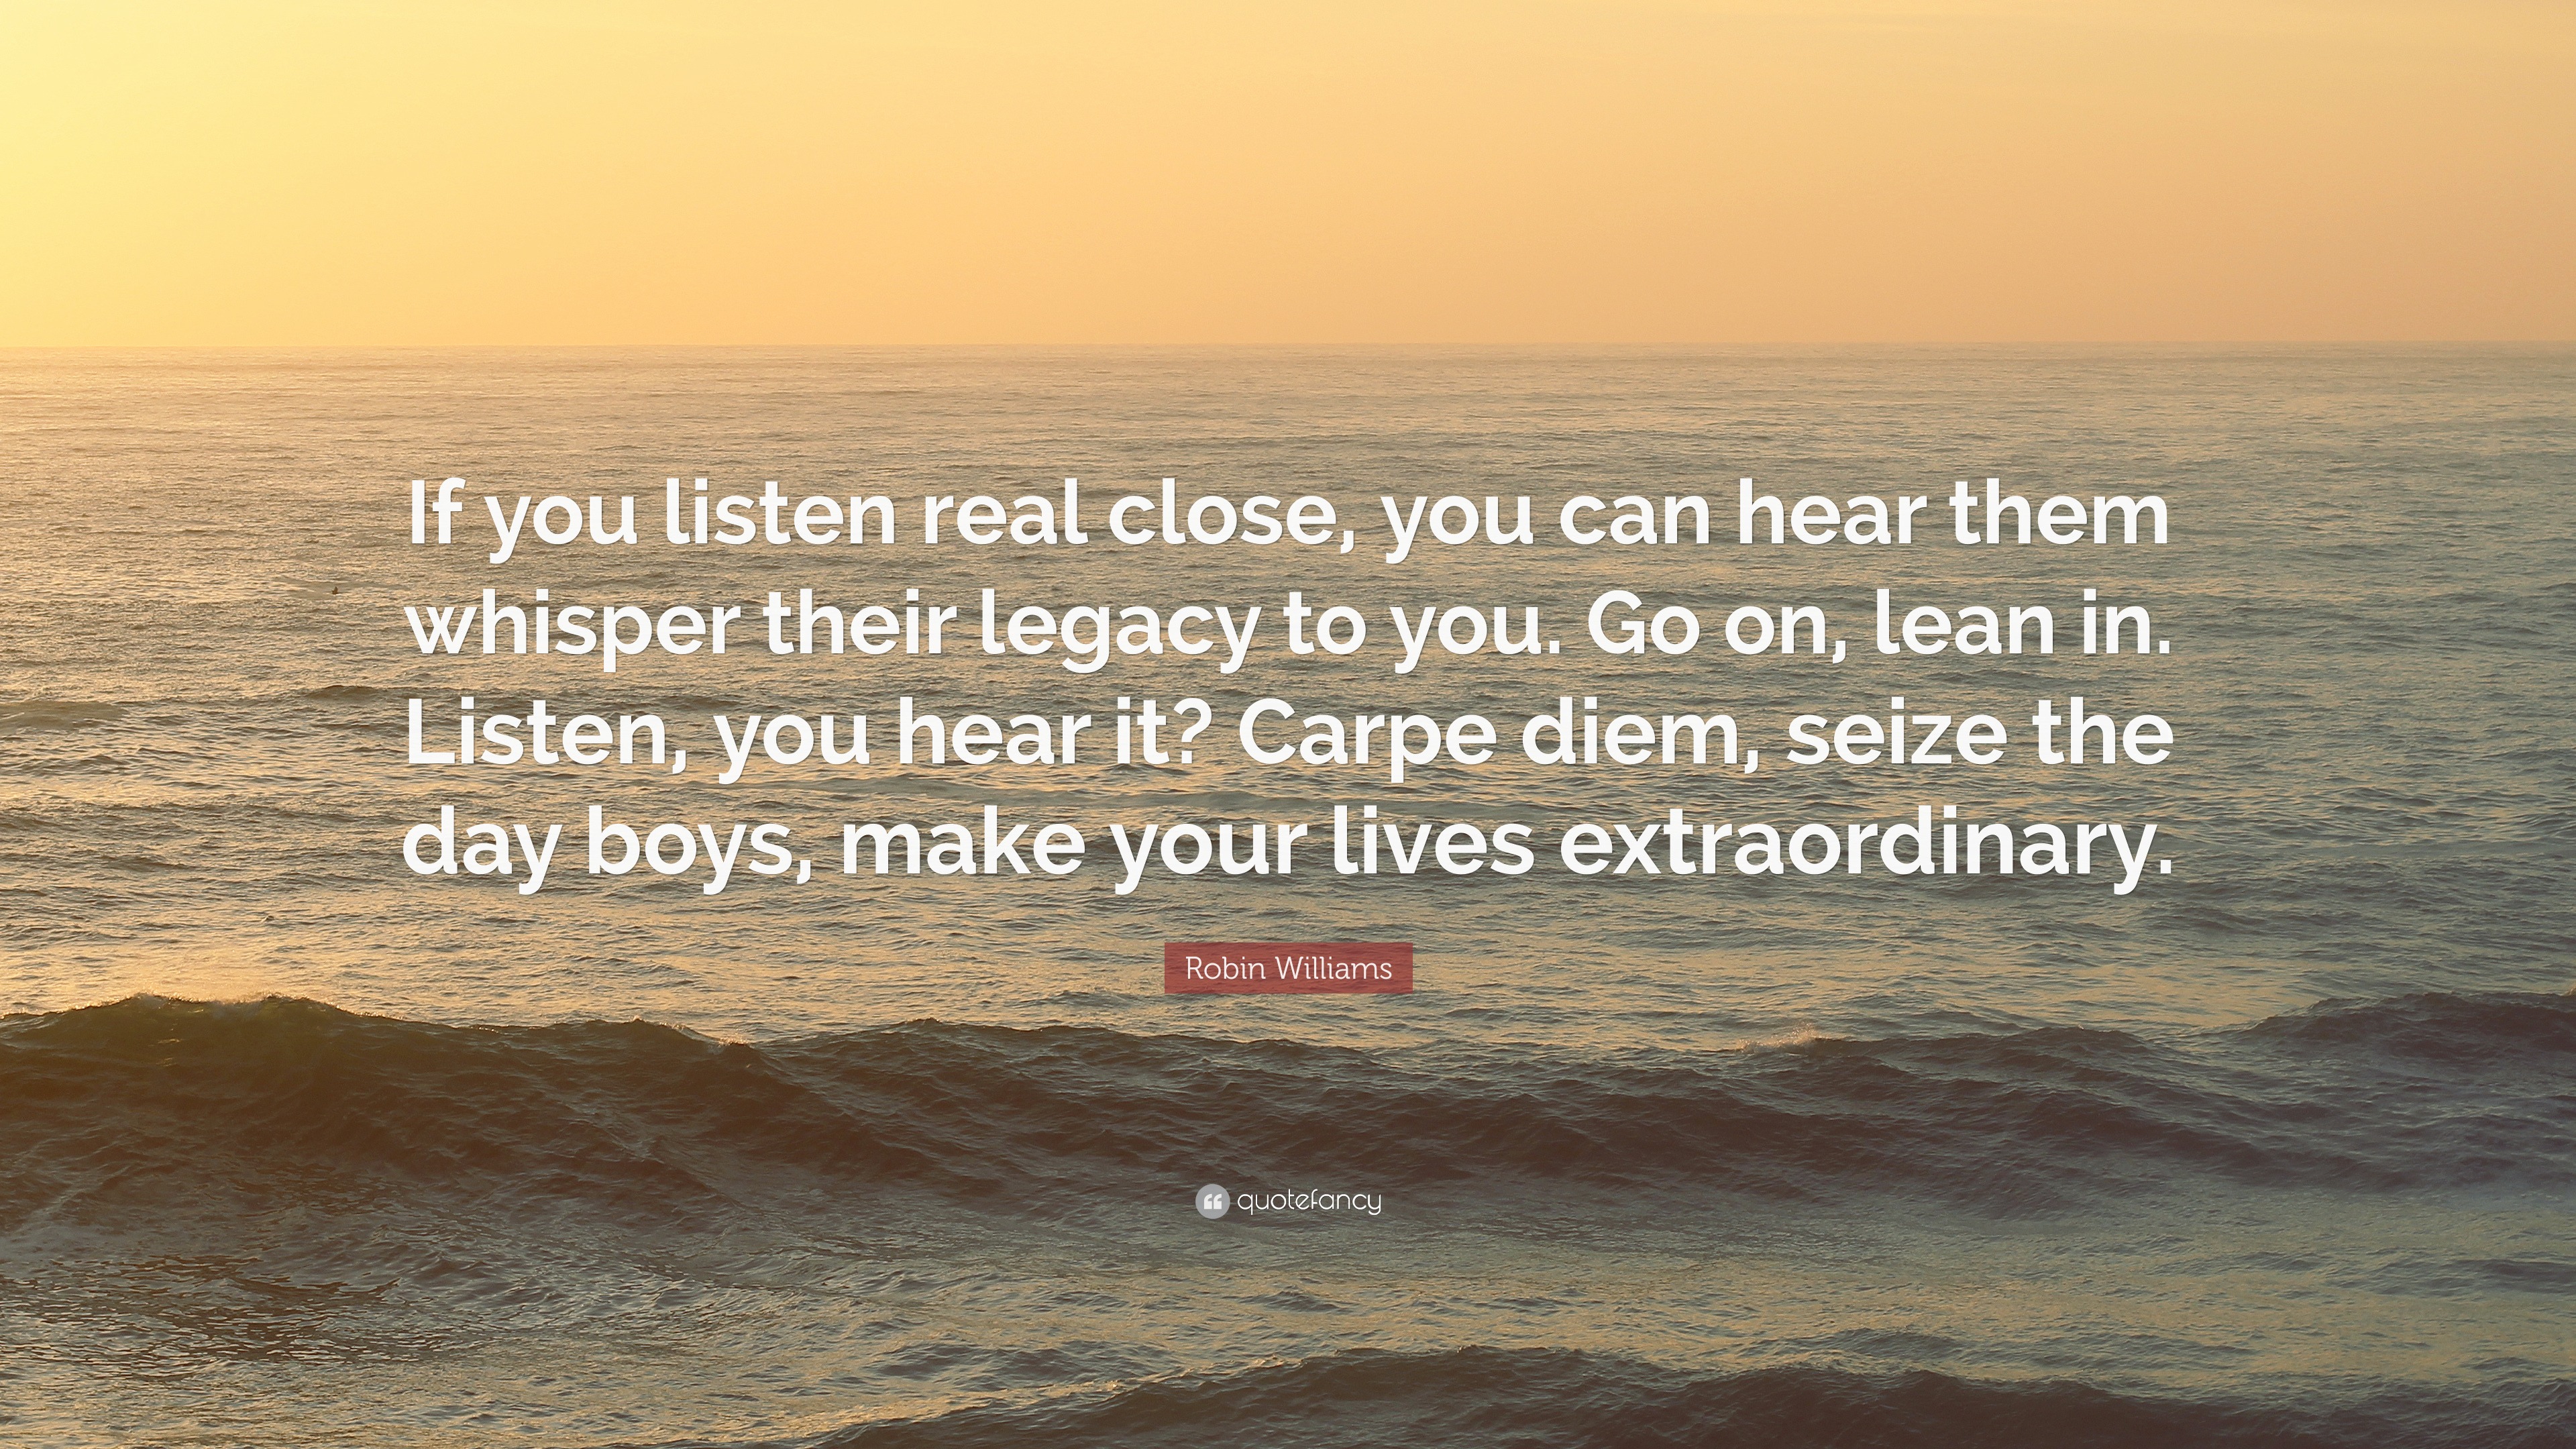 Robin Williams Quote: “If you listen real close, you can hear them ...